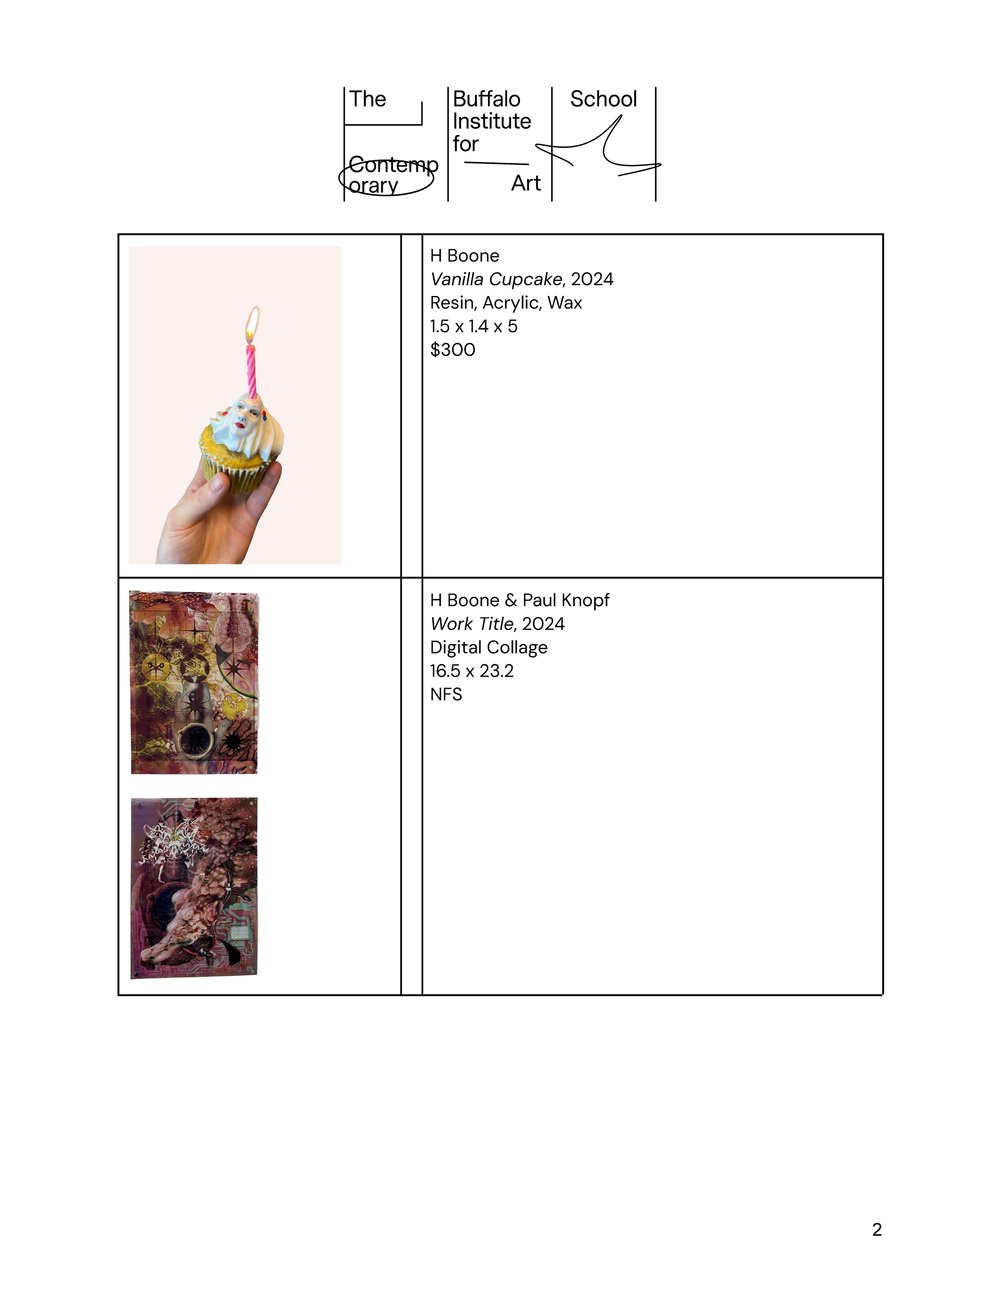 Group Show BICA School Project Space Checklist Template_Page_2.jpg